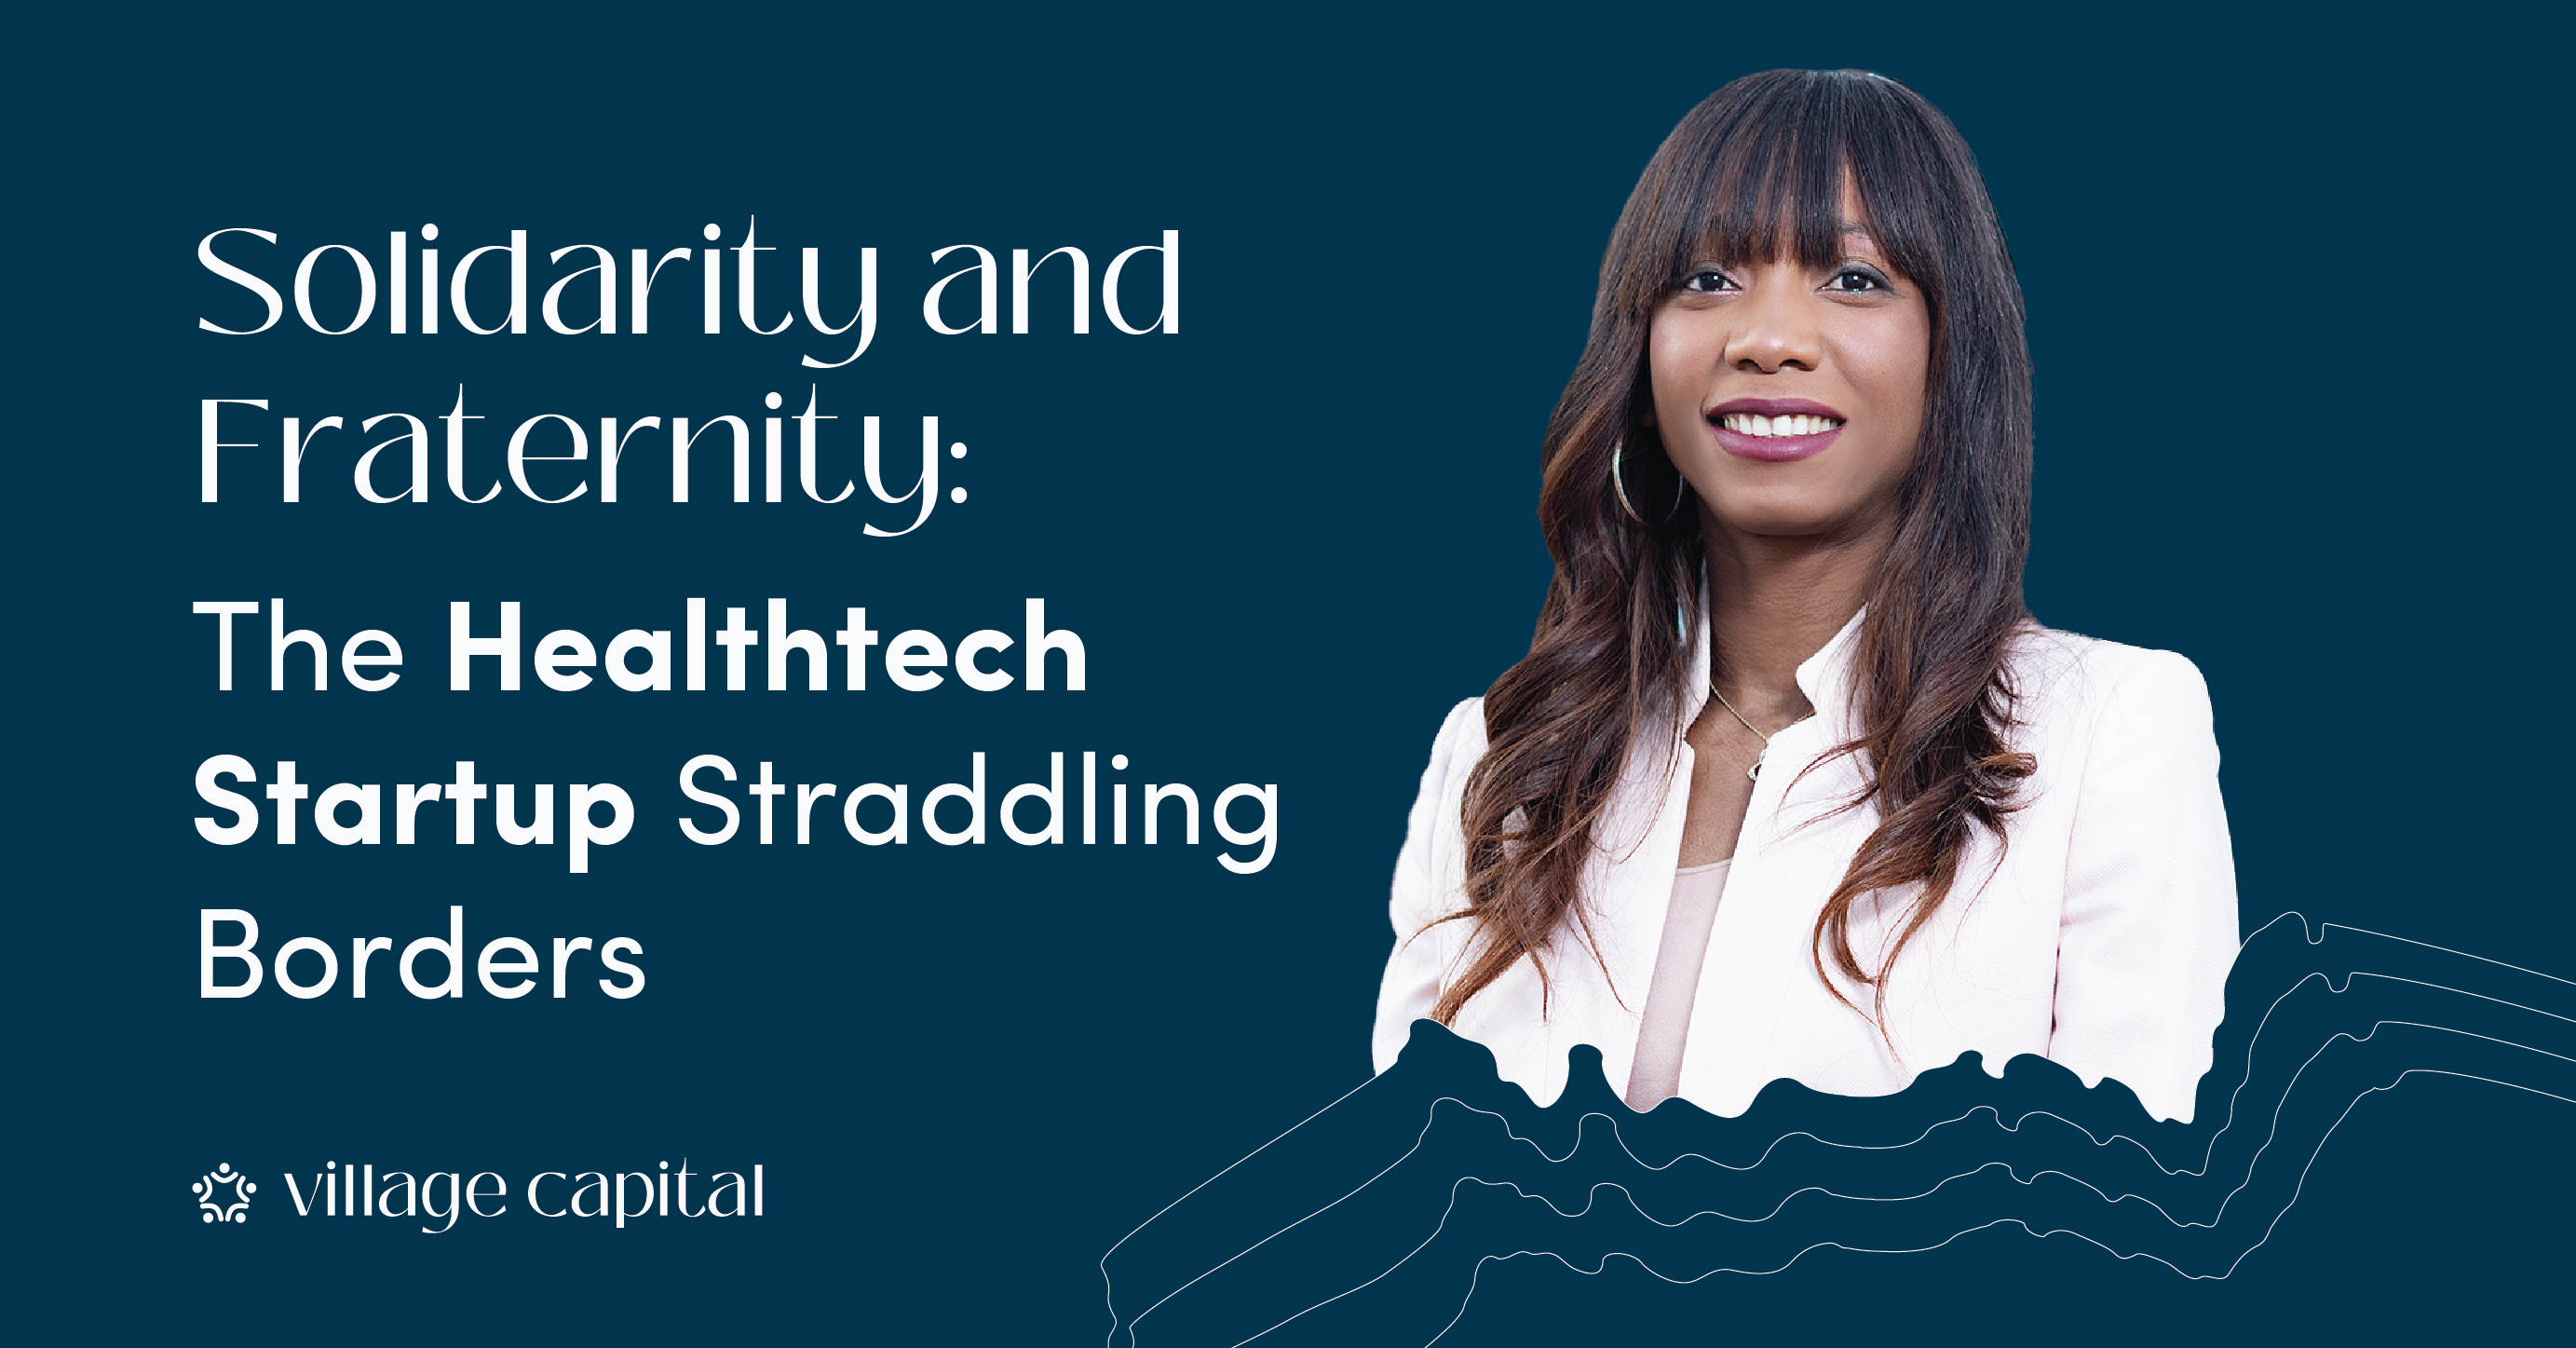 Blog_Susu_Solidarity and Fraternity The Healthtech Startup Straddling Borders